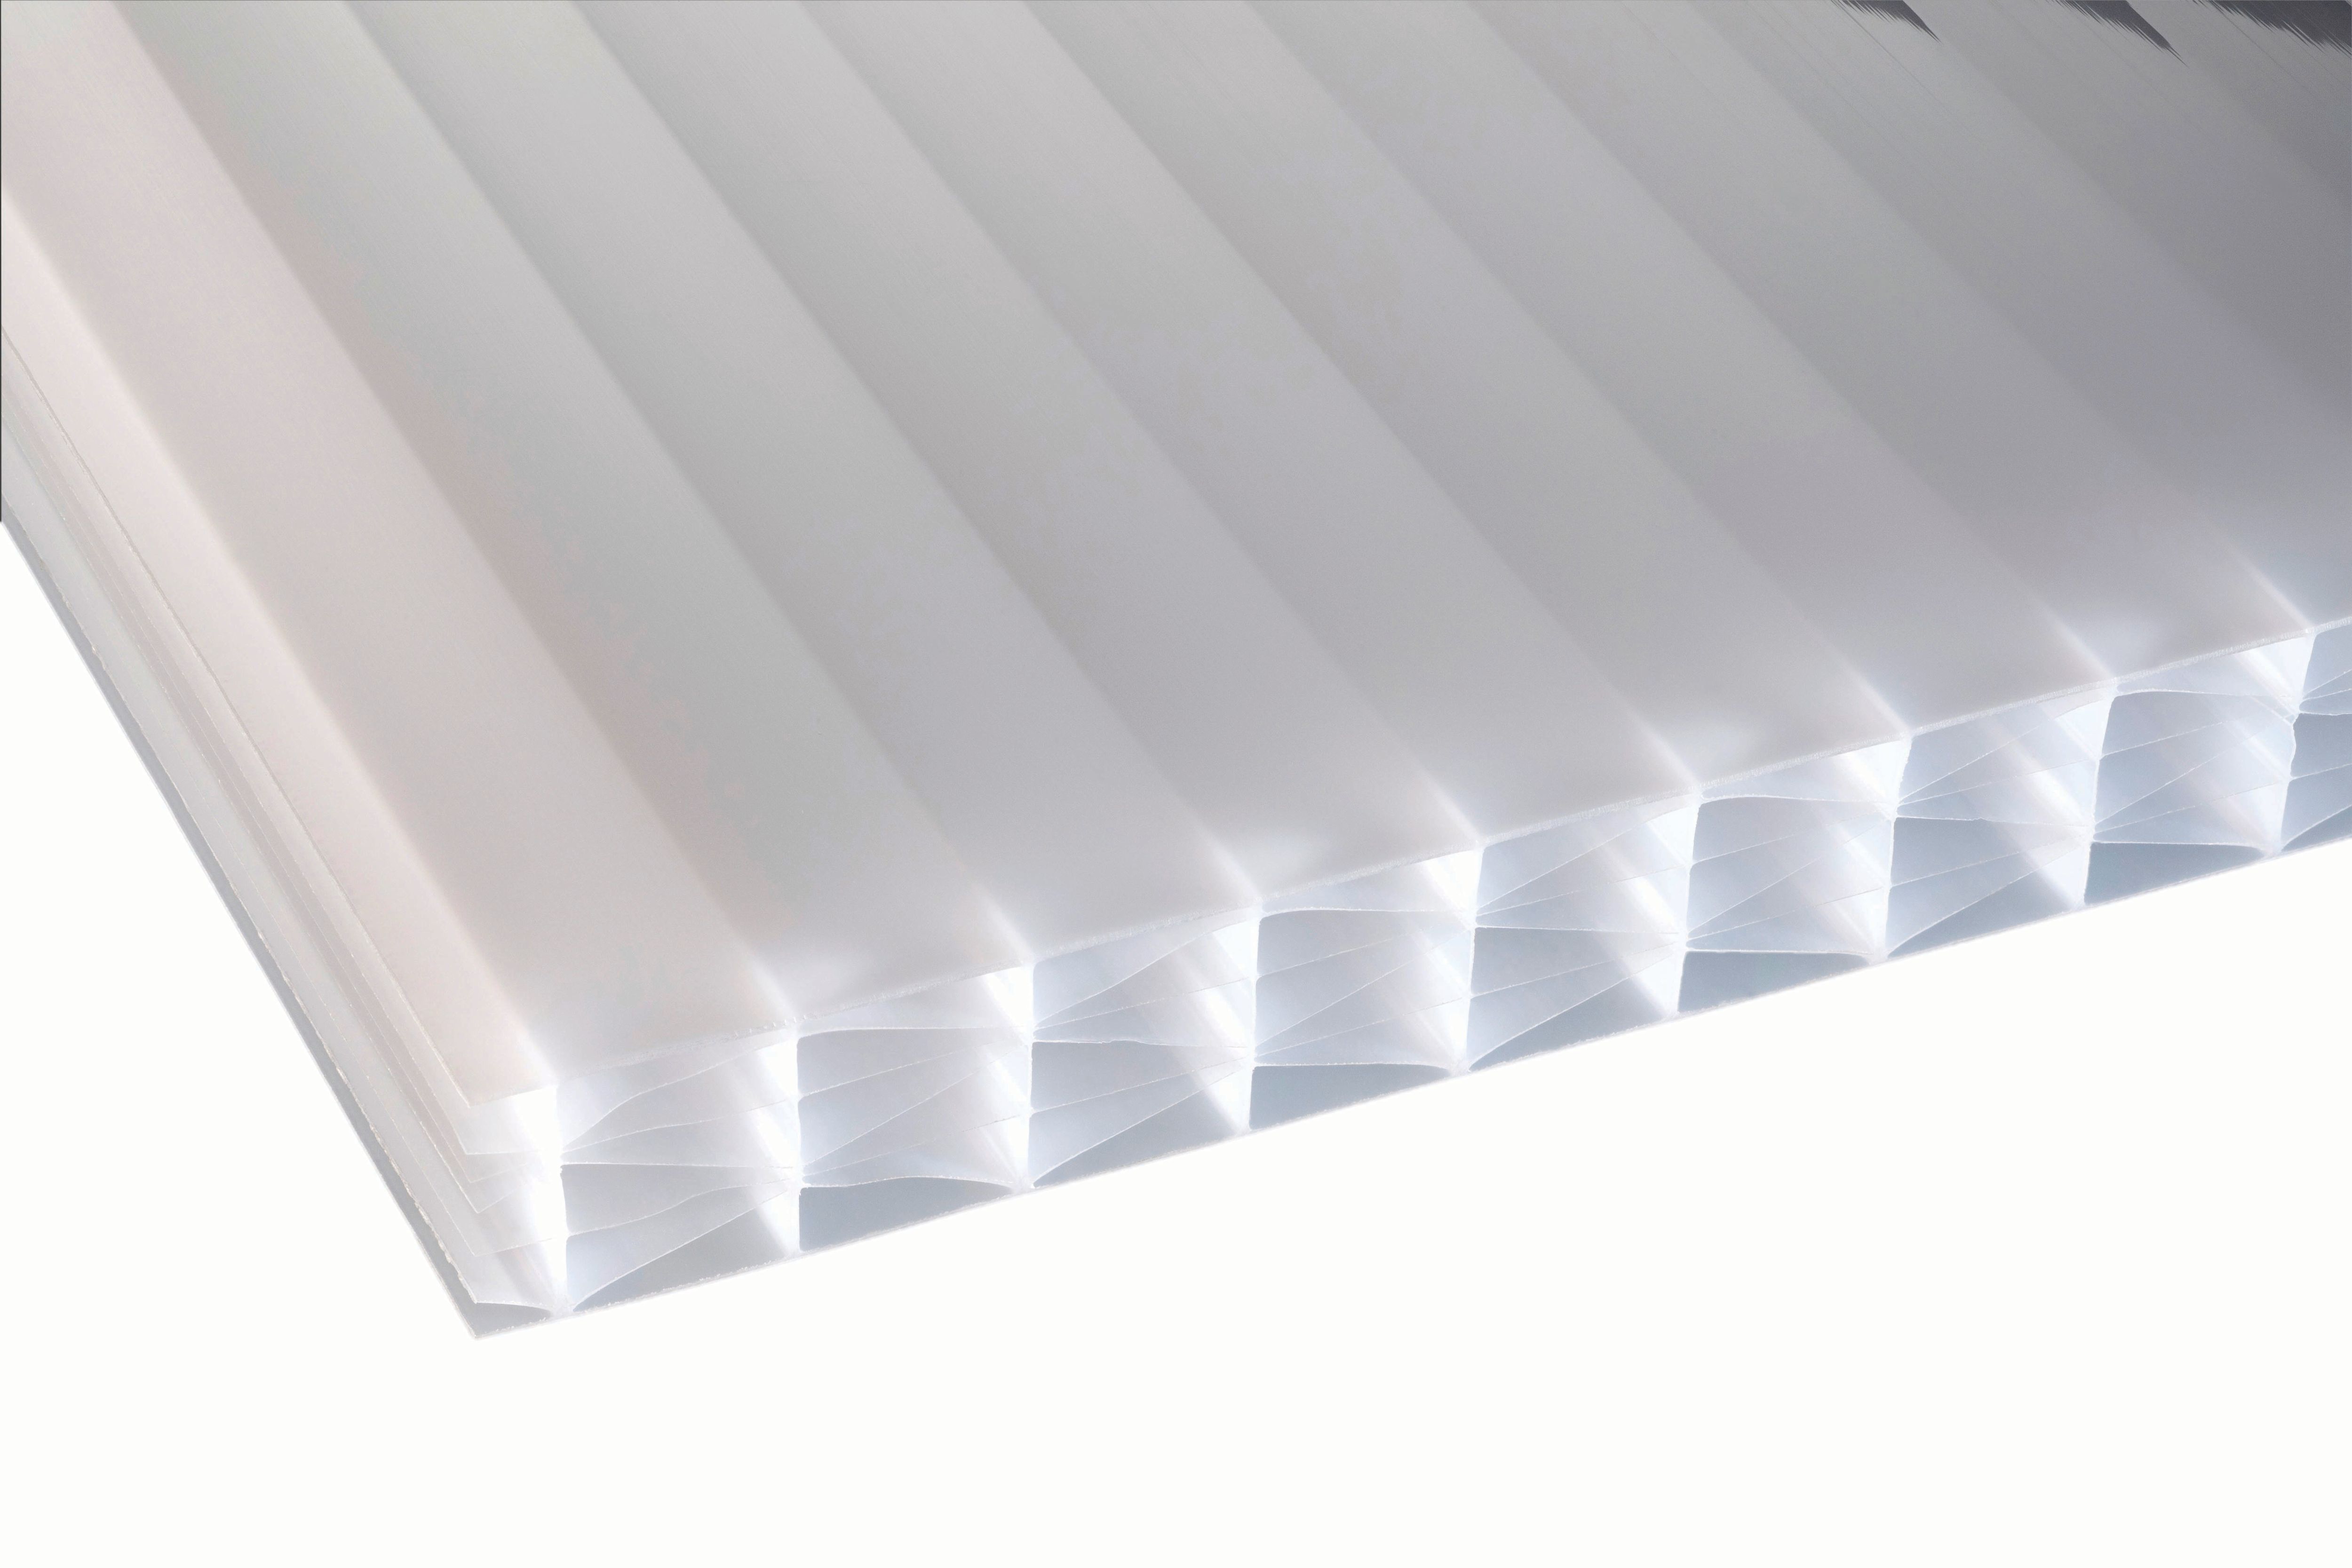 Image of 25mm Opal Multiwall Polycarbonate Sheet - 2500 x 1600mm